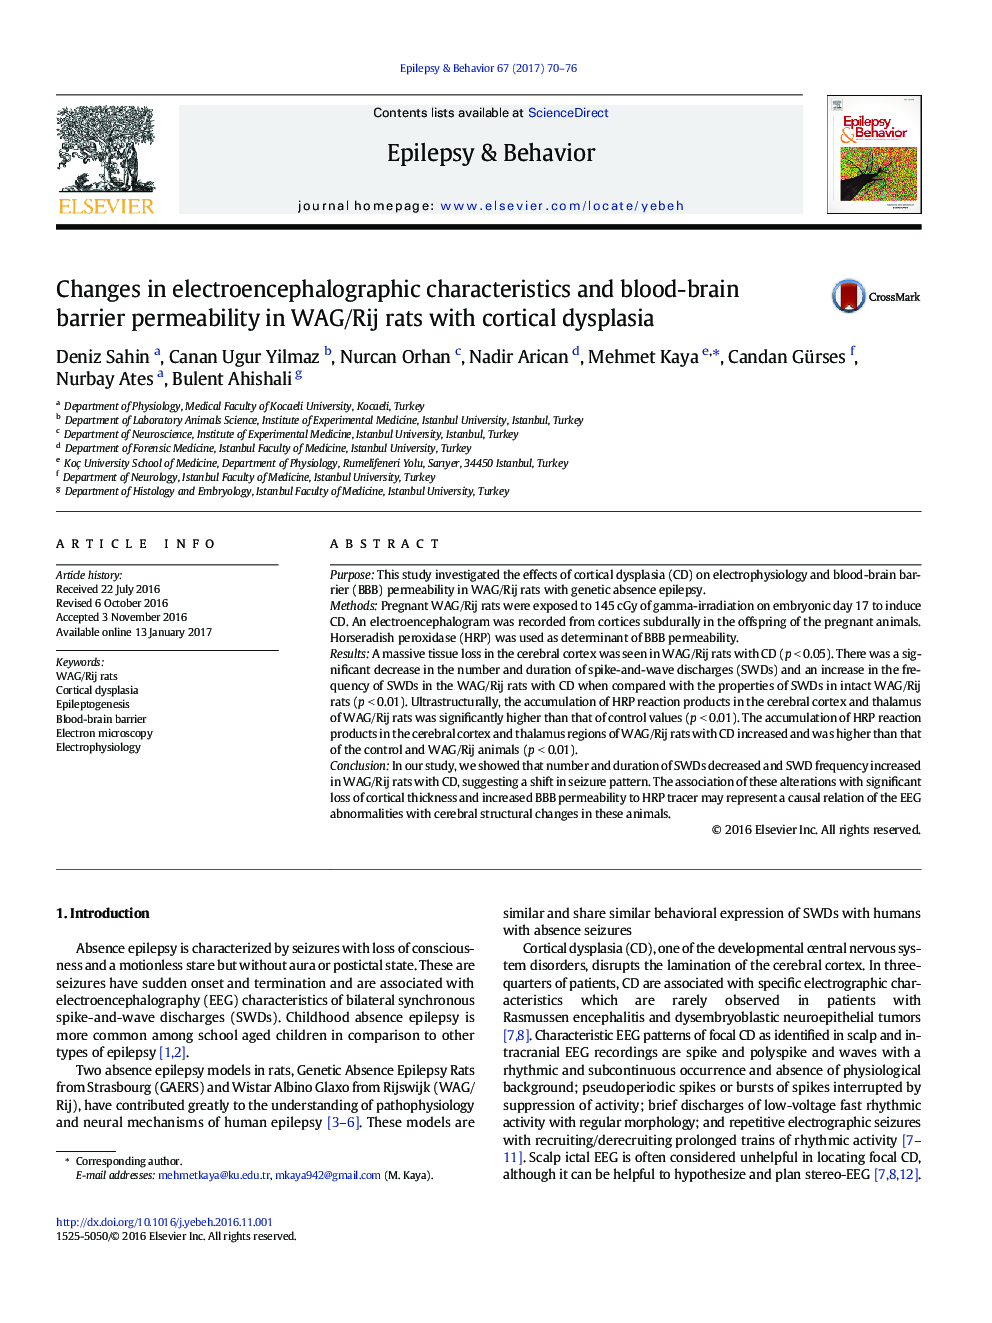 Changes in electroencephalographic characteristics and blood-brain barrier permeability in WAG/Rij rats with cortical dysplasia